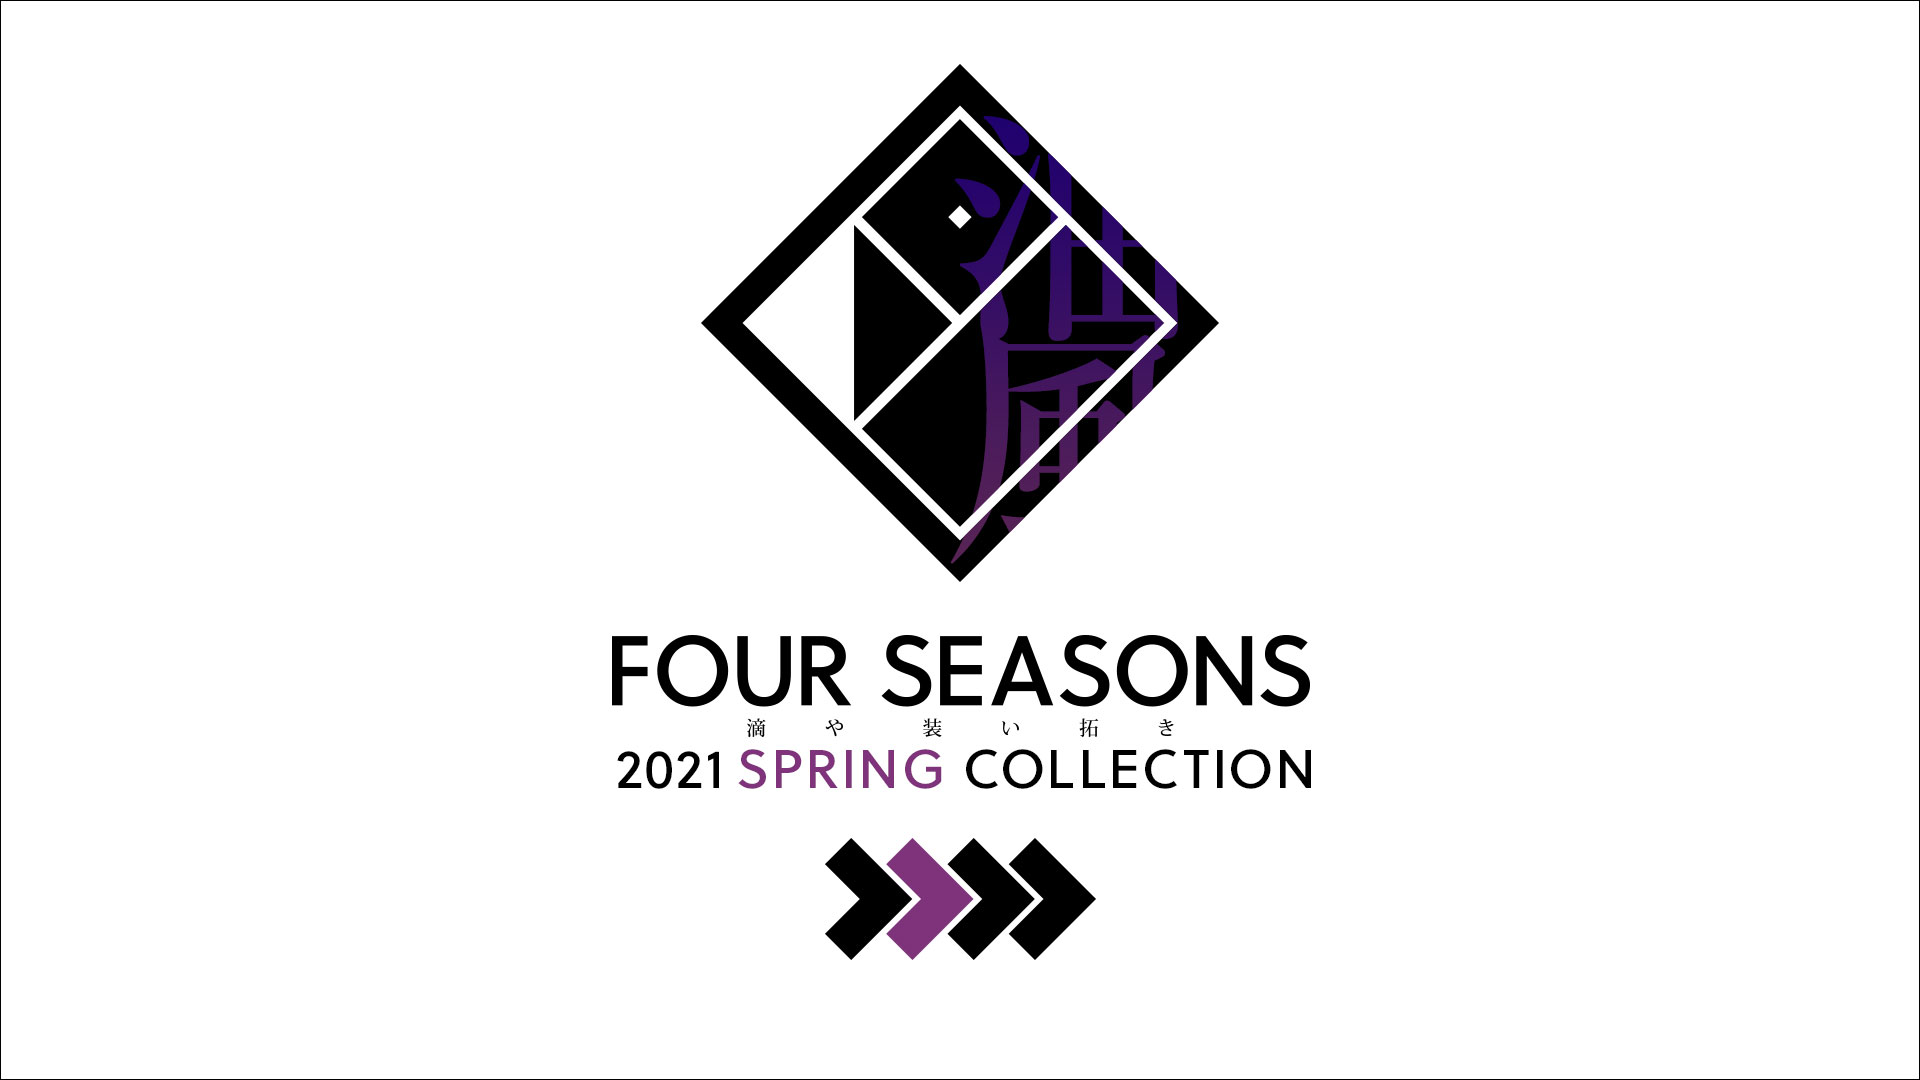 [PHOTO:FOUR SEASONS 2021 SPRING COLLECTION]